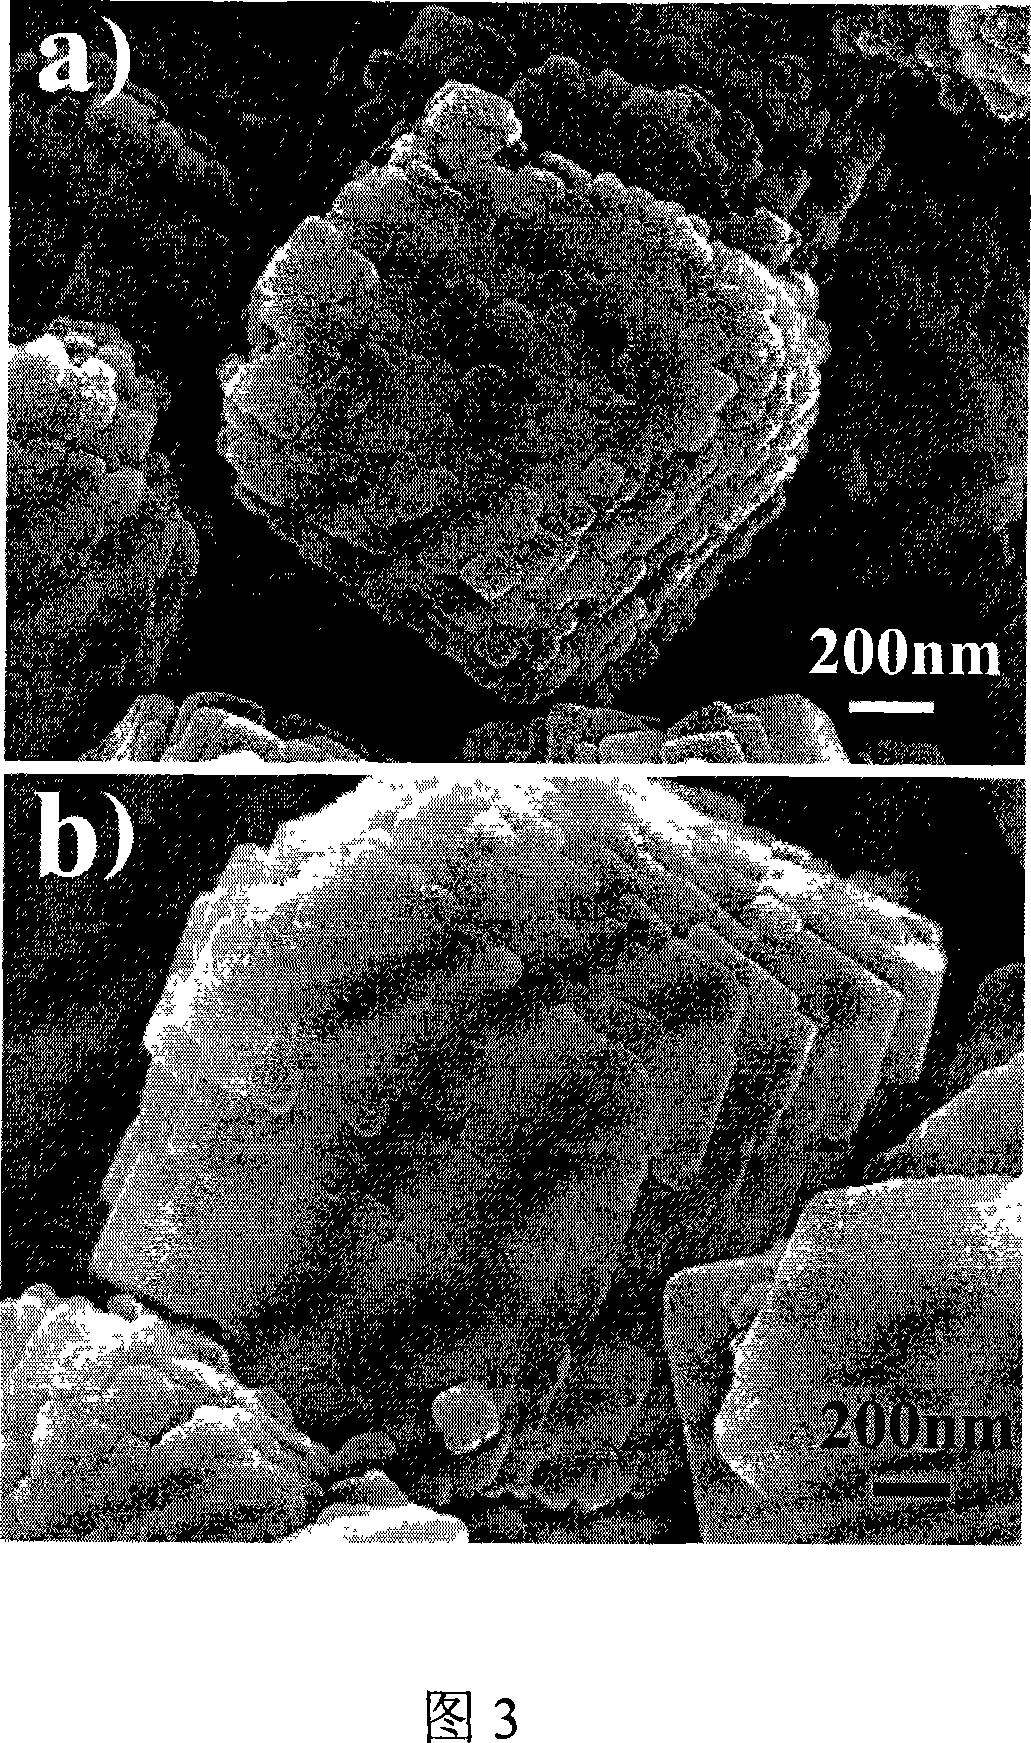 Nano layered calcium carbonate base bionic composite material and synthetic method thereof